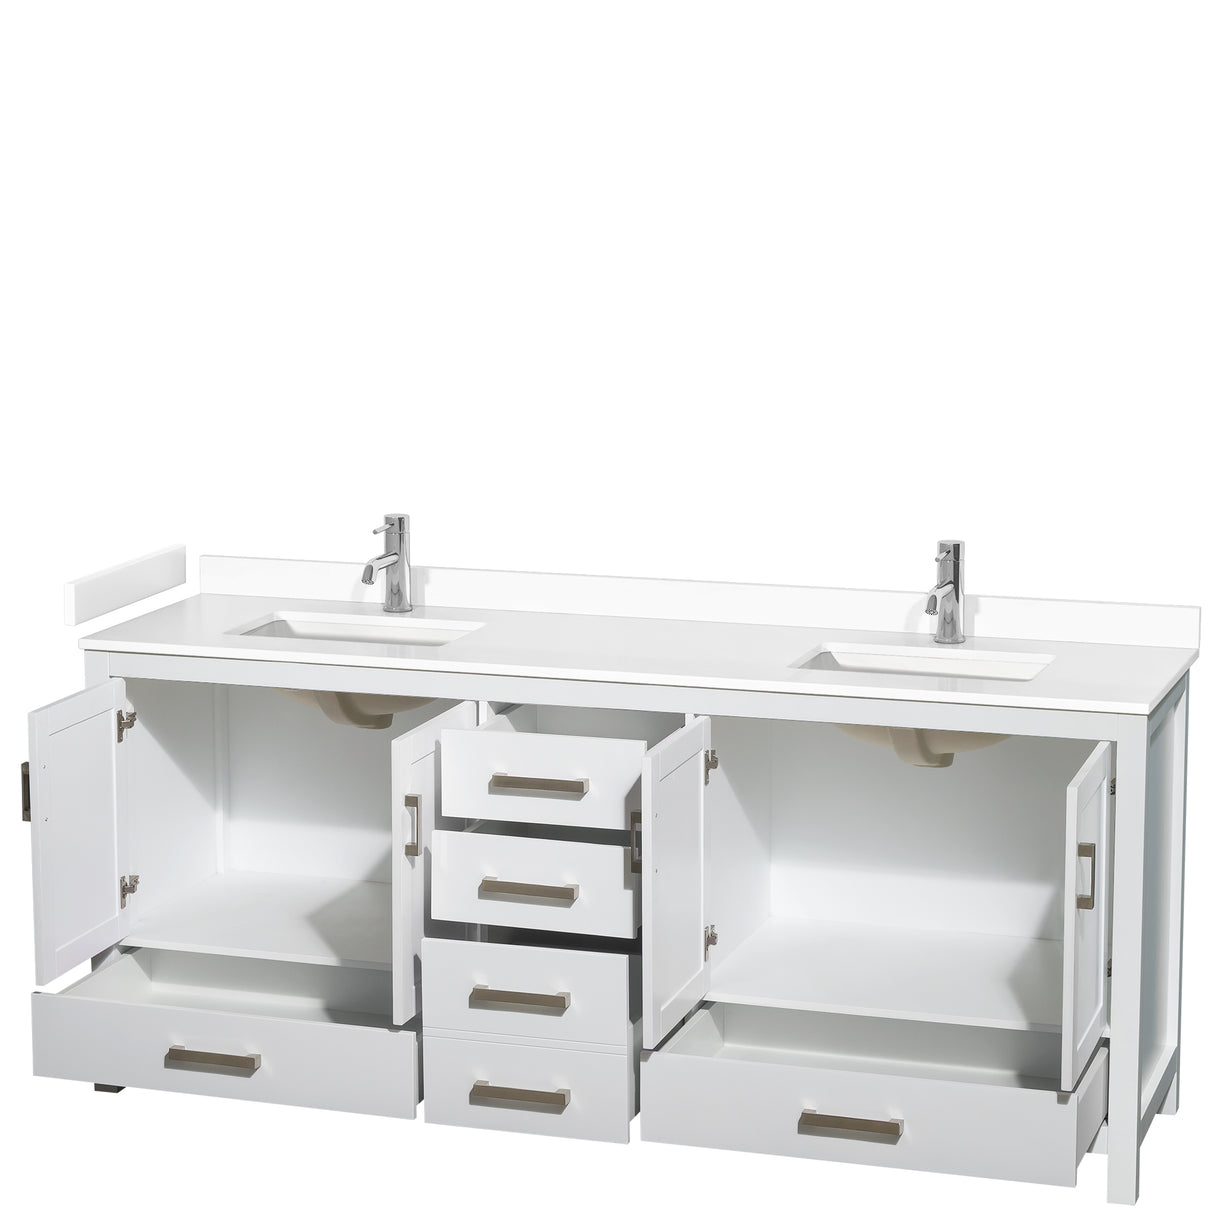 Sheffield 80 Inch Double Bathroom Vanity in White White Cultured Marble Countertop Undermount Square Sinks No Mirror